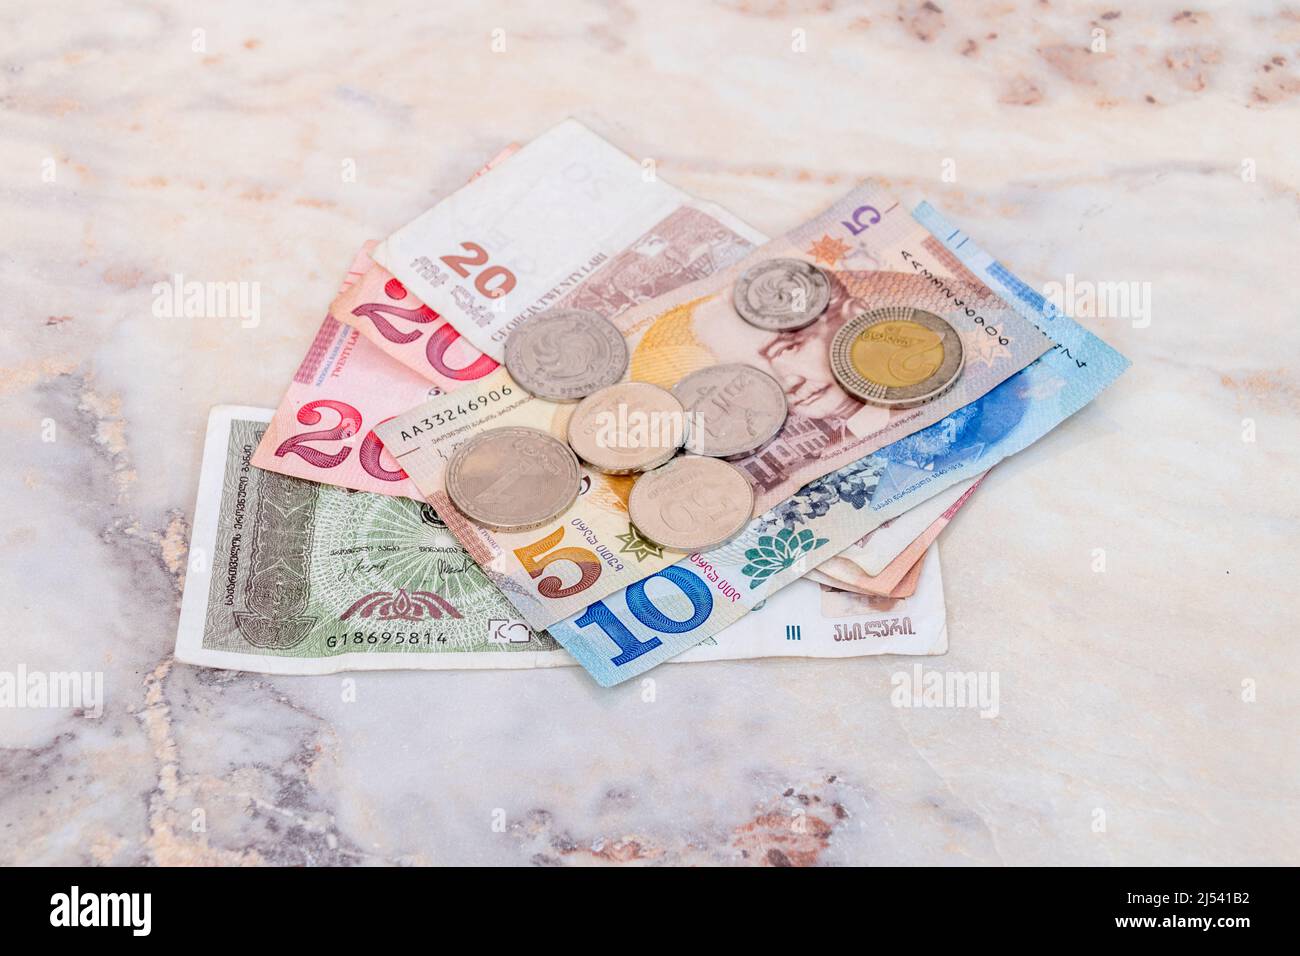 Georgian lari (GEL) banknotes and coins on table. Stock Photo